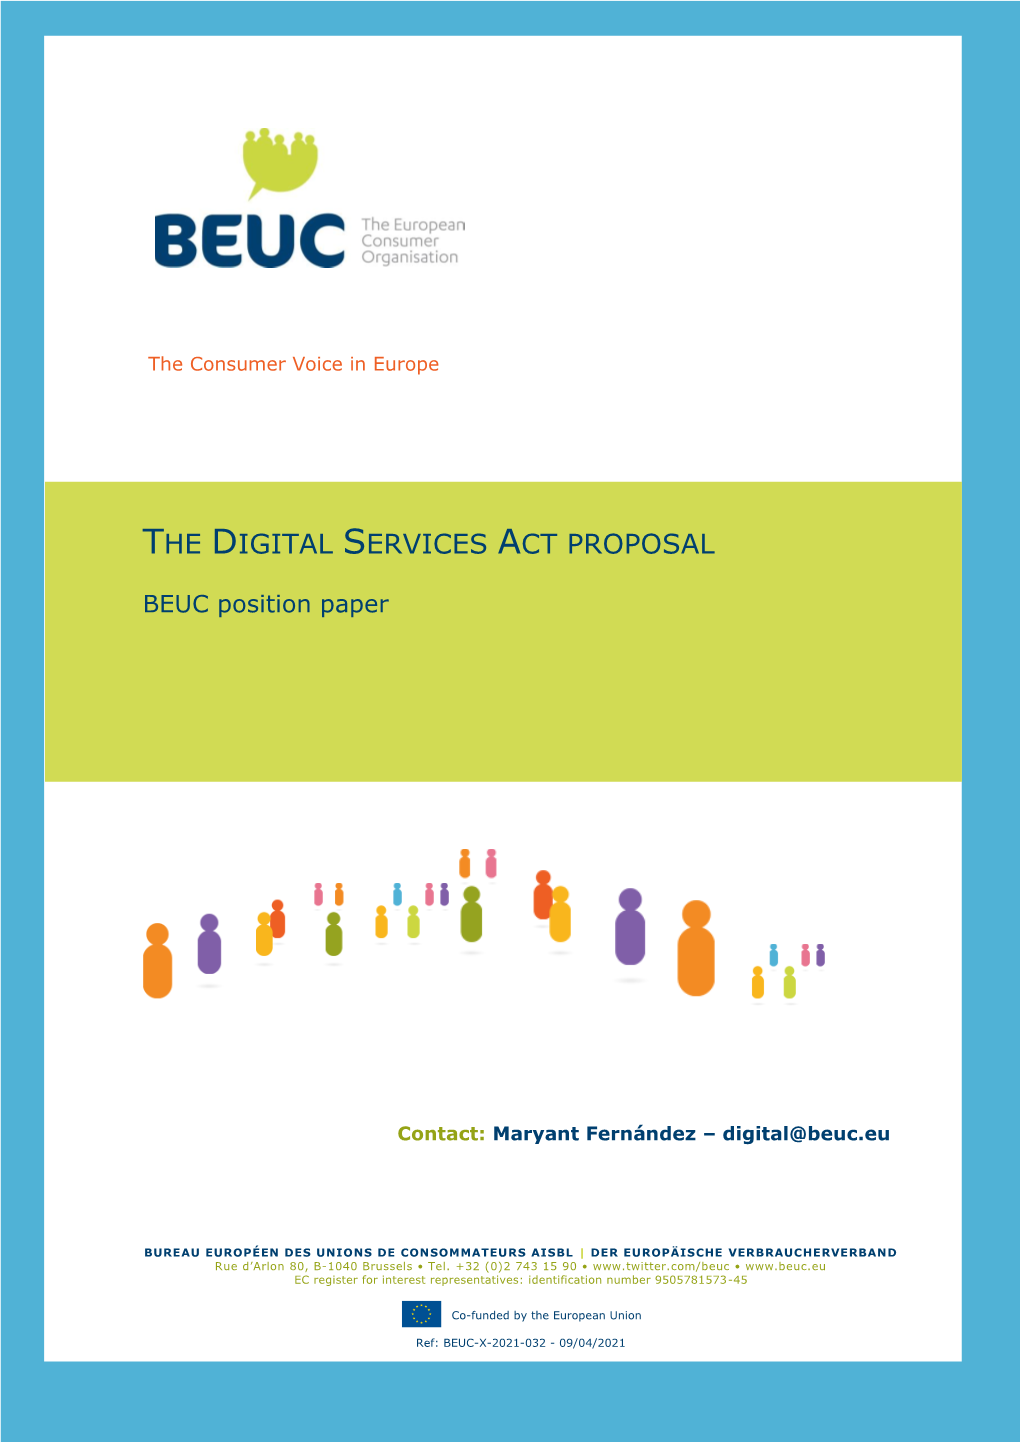 The Digital Services Act Proposal